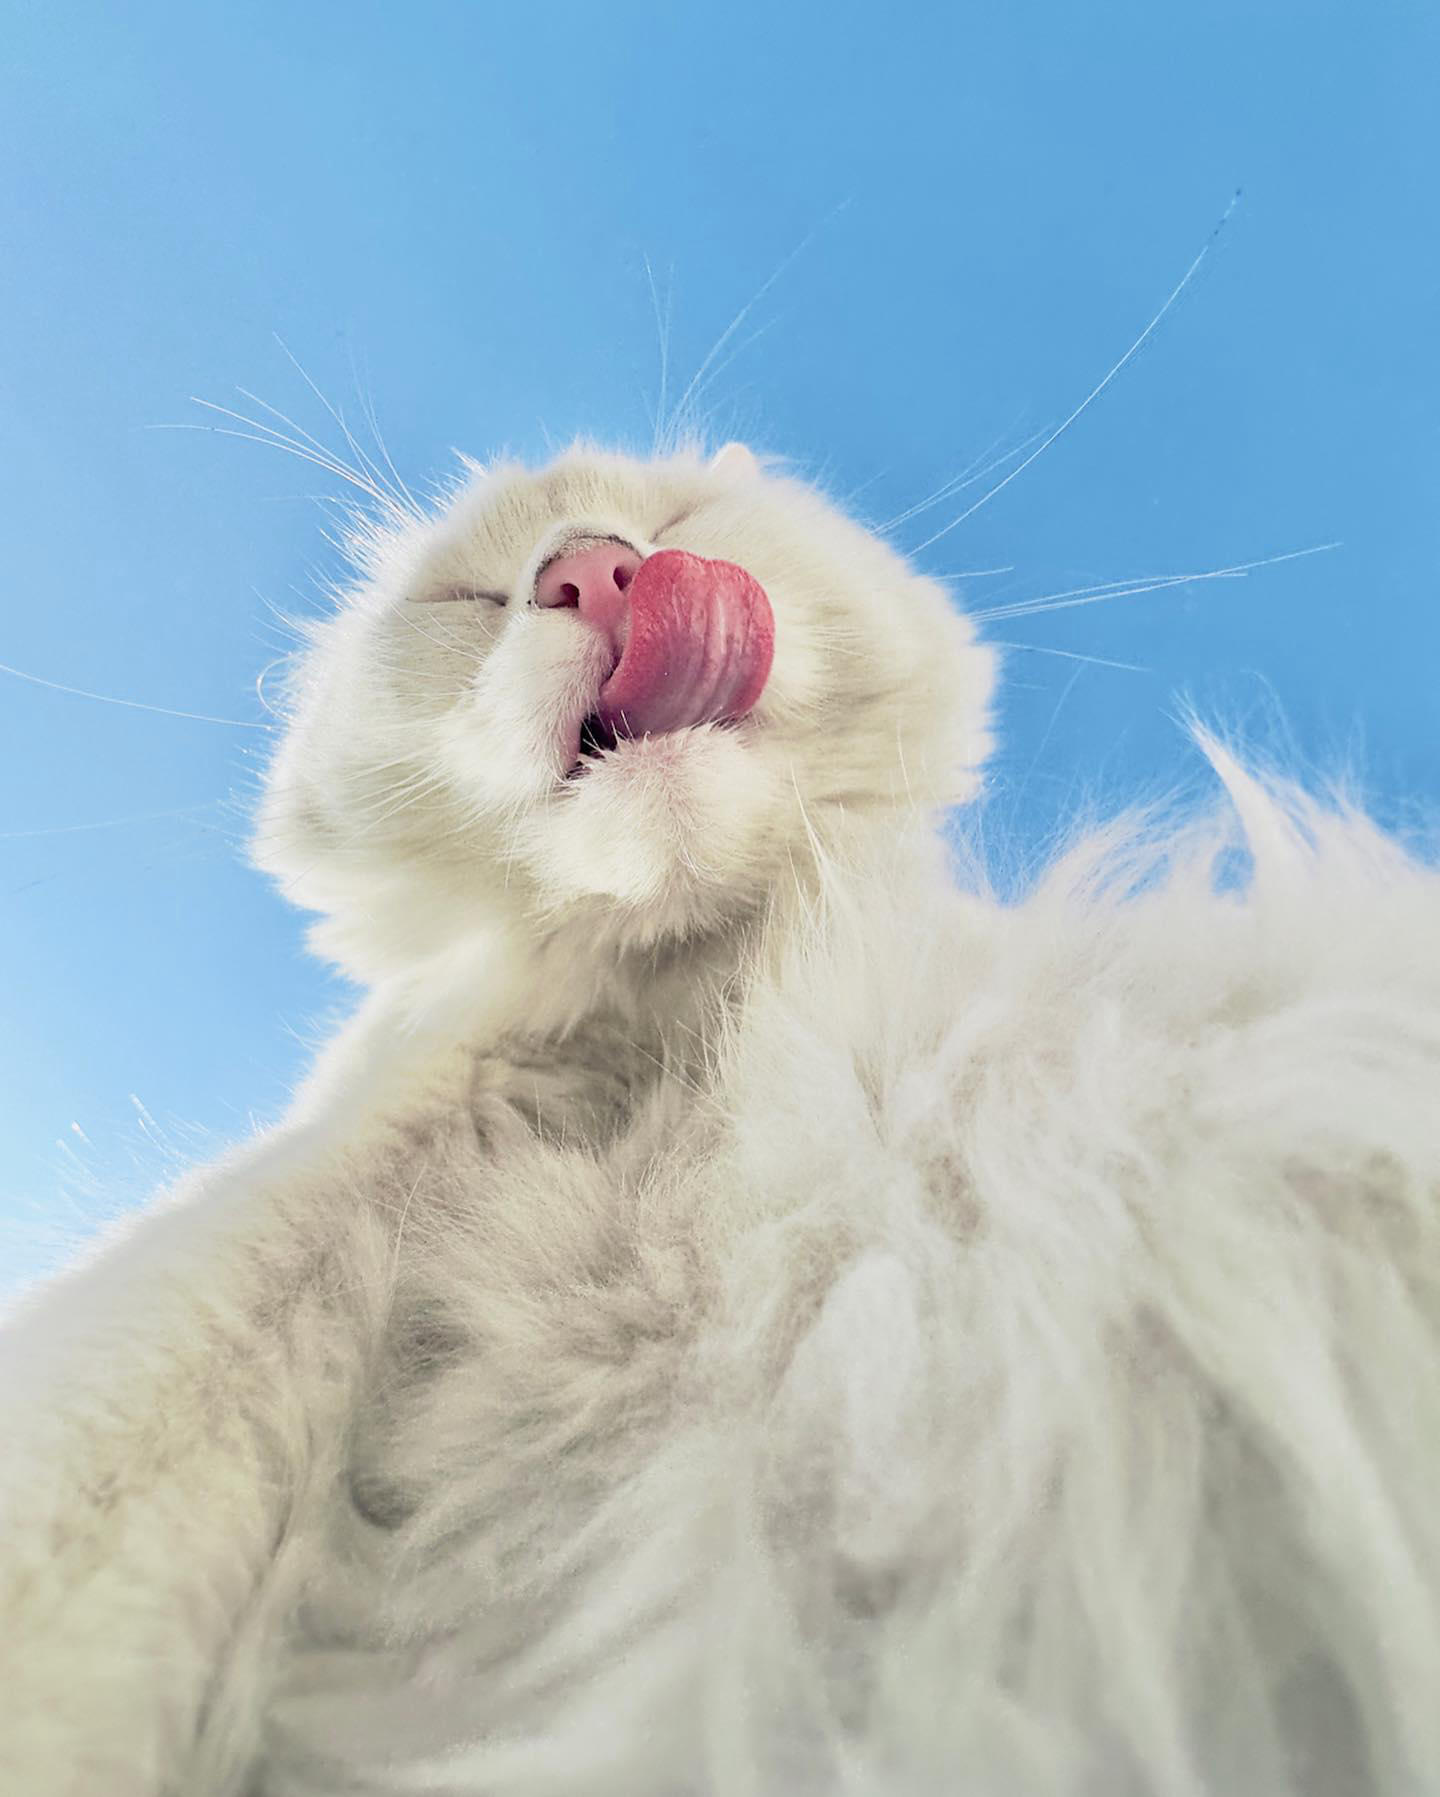 image  1 “My goal was to make the viewer feel like the cat was taking a selfie